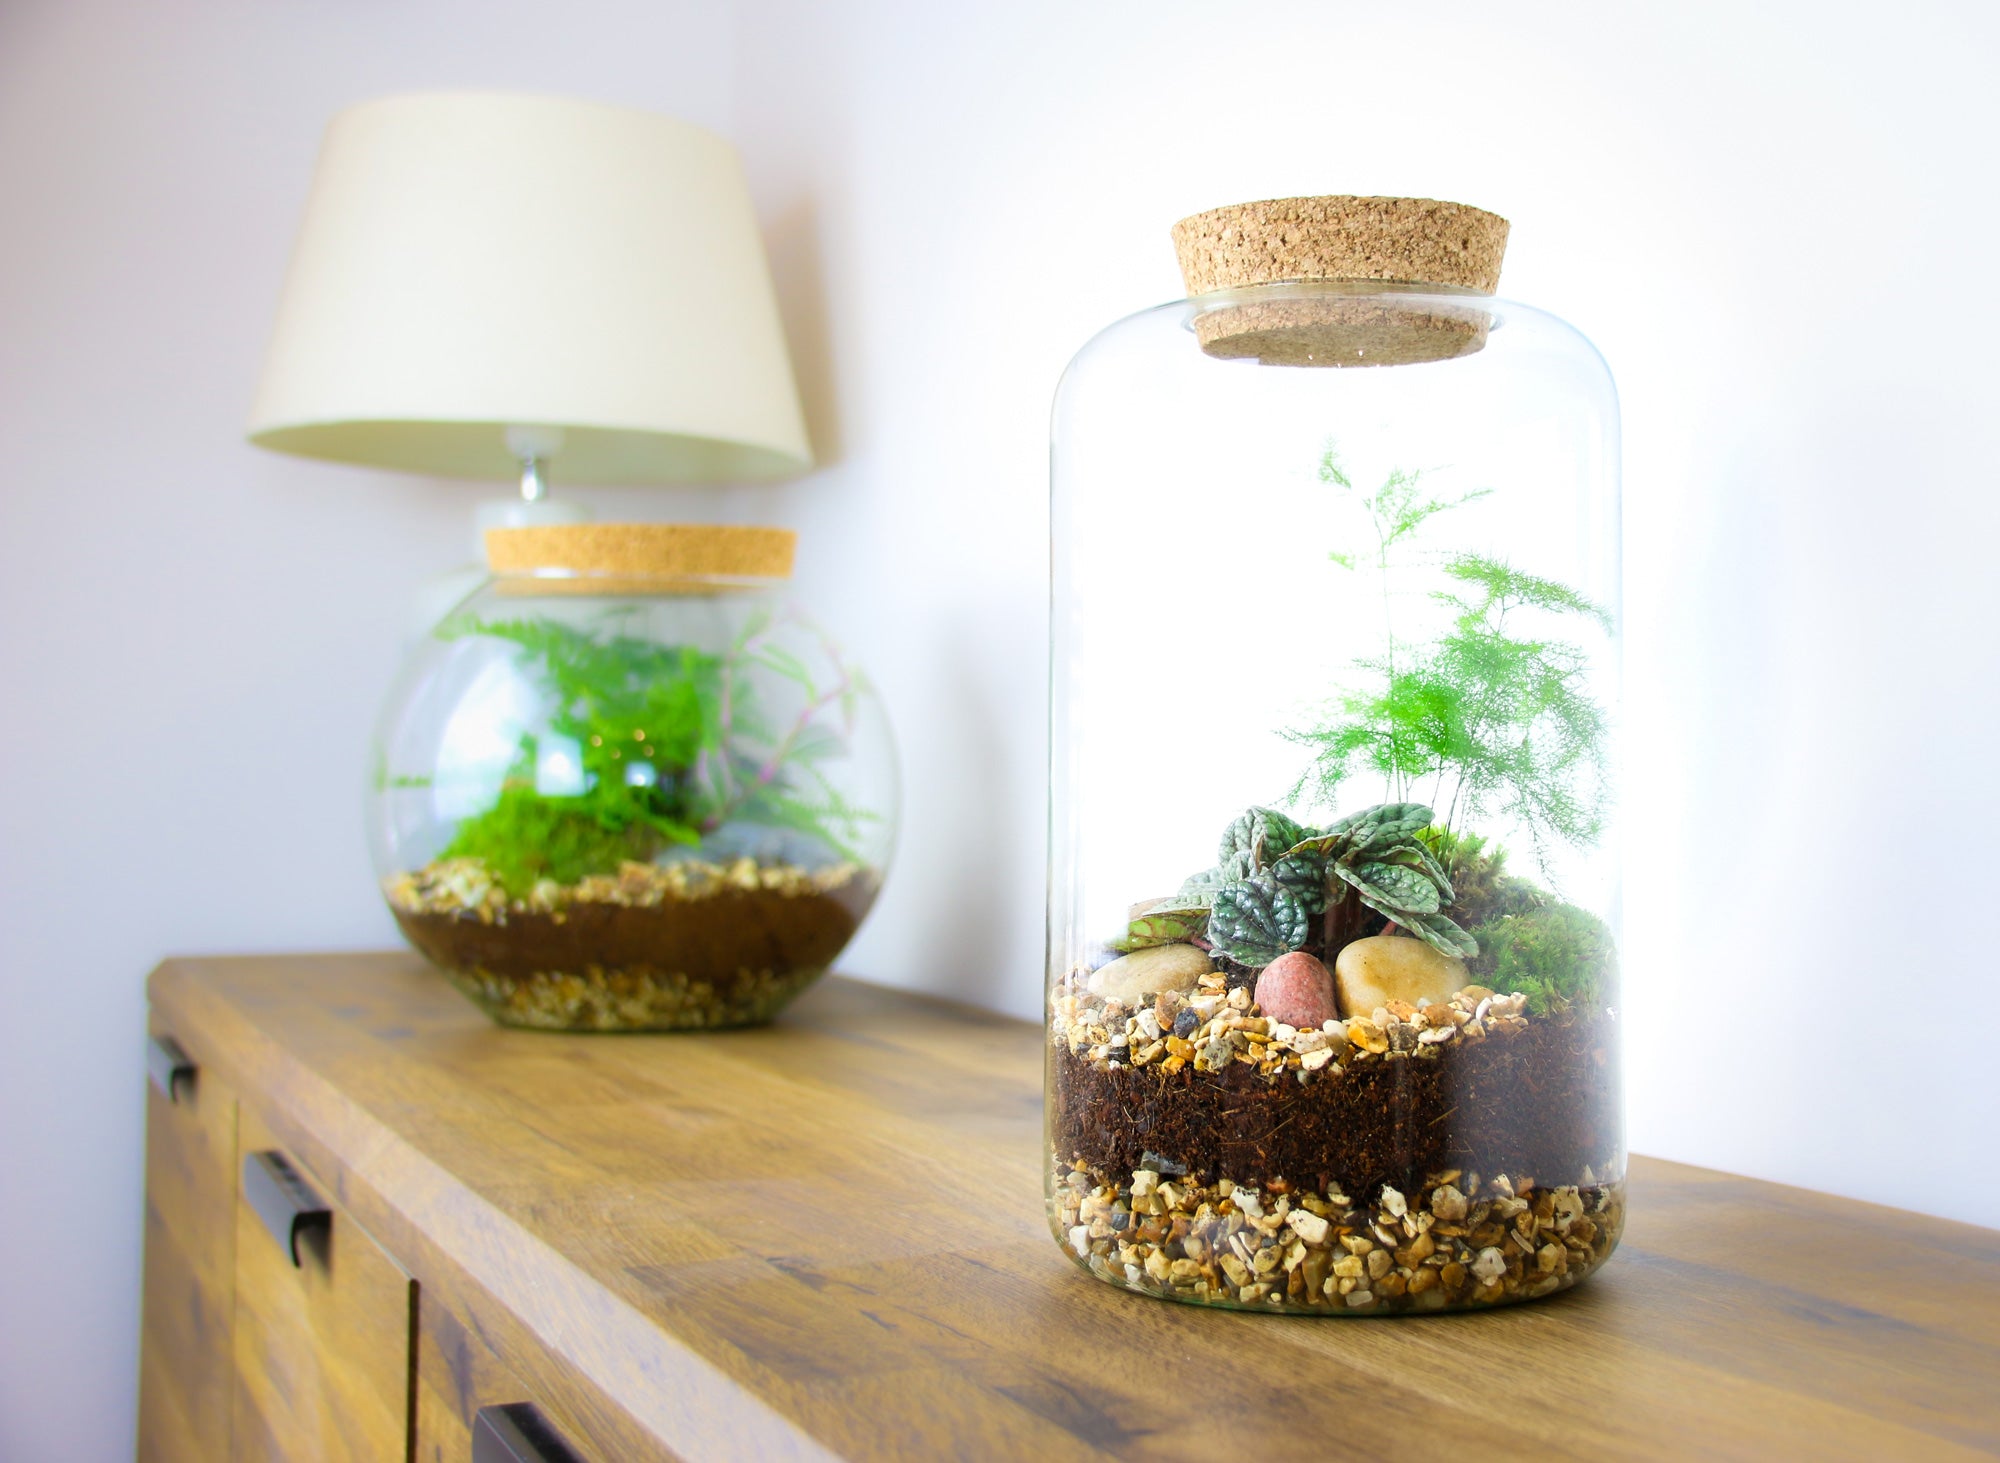 Recycled glass terrarium kit with cork lid